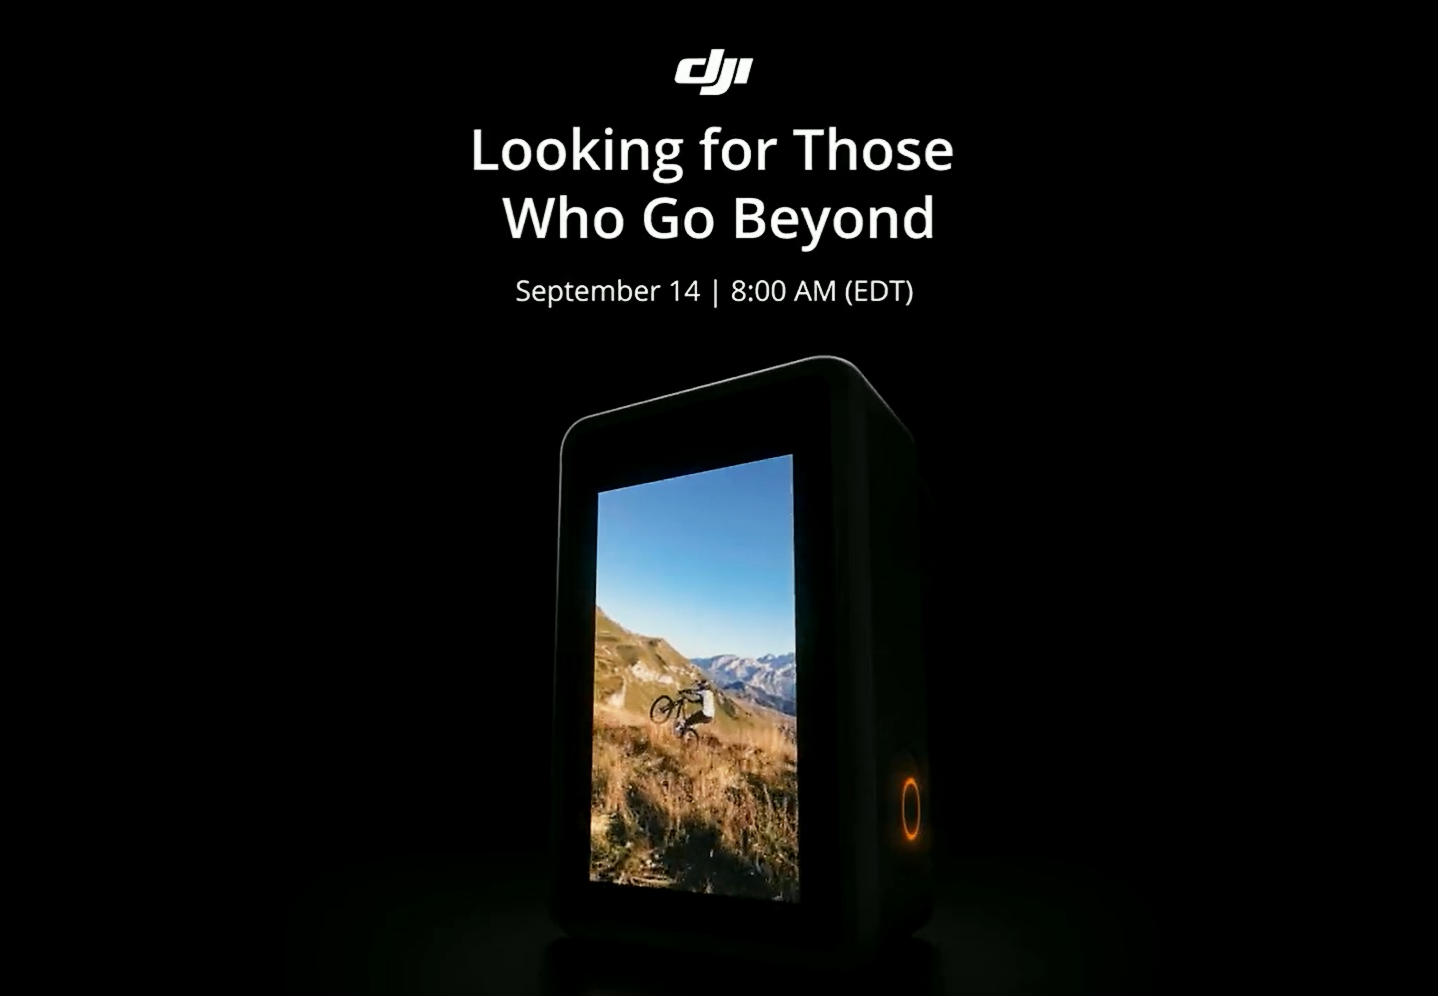 dji action 3 product launch event september 16